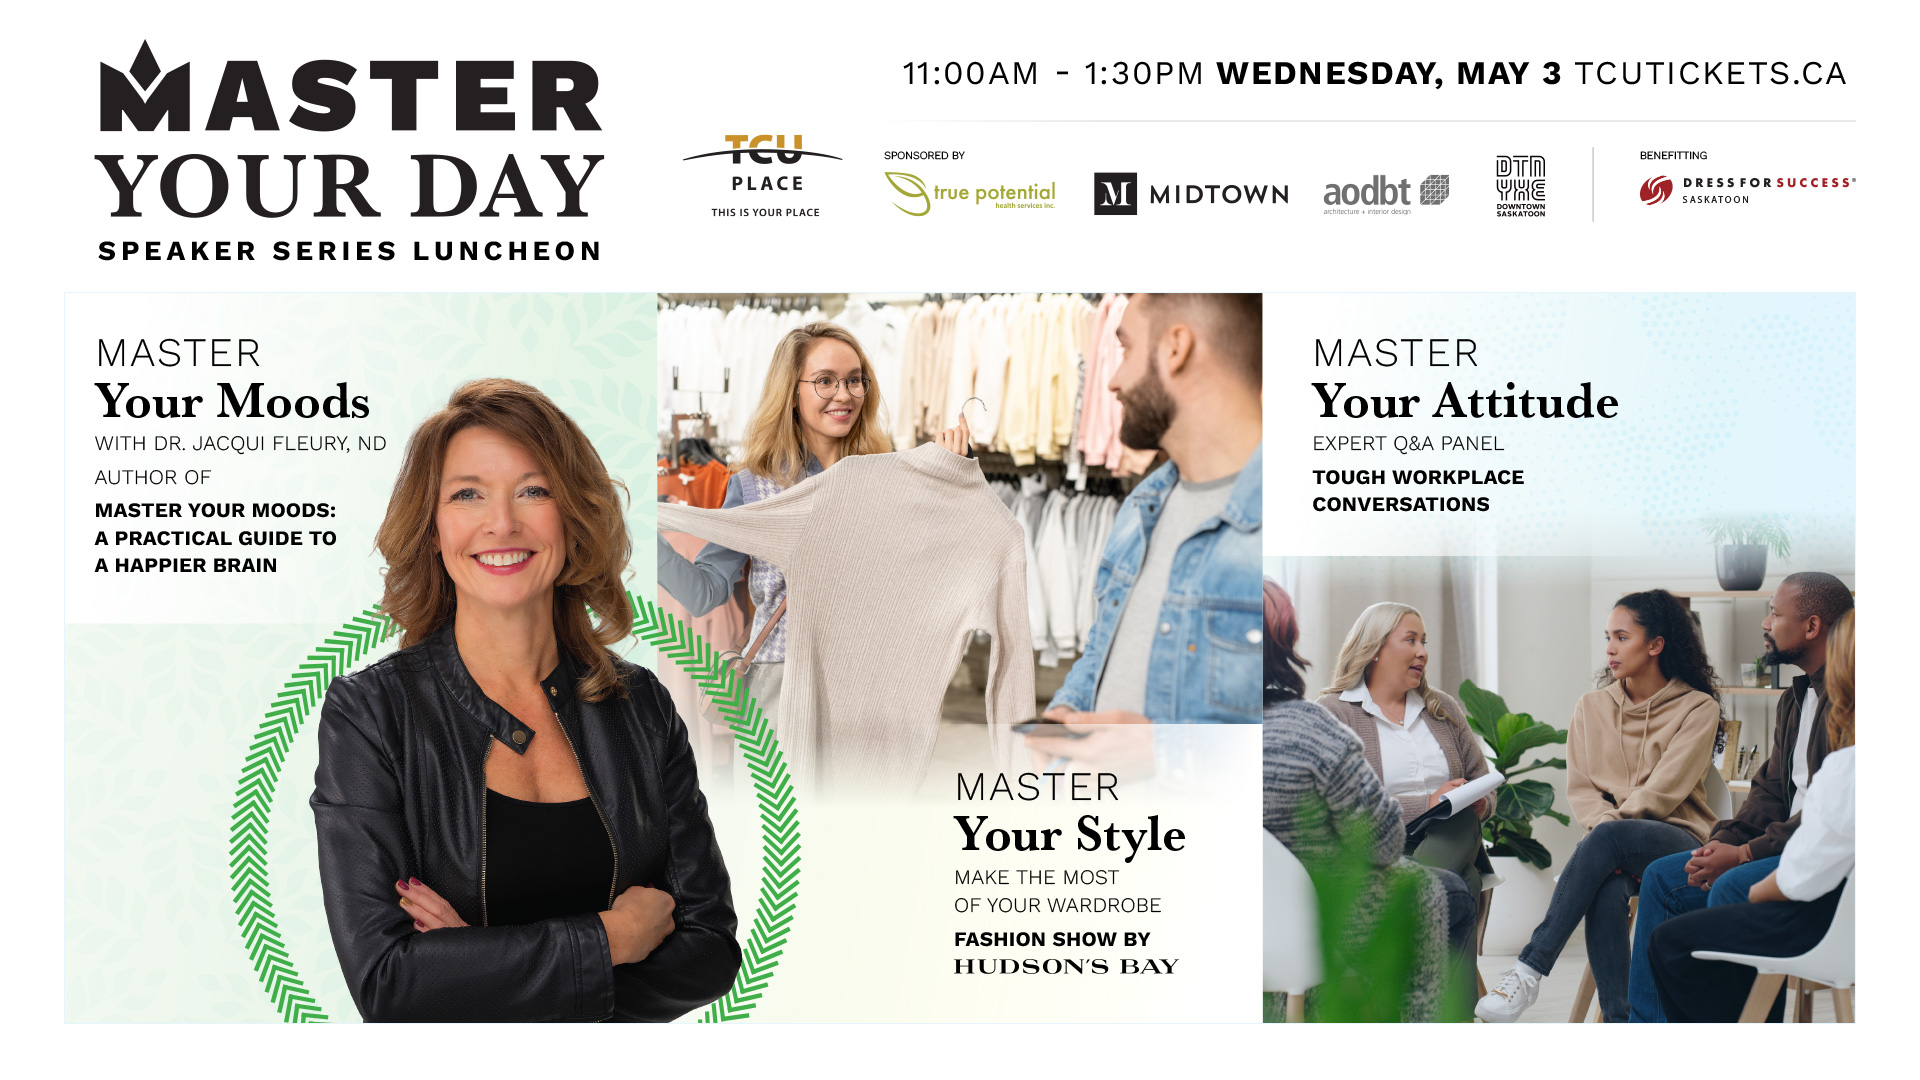 Master Your Day Speaker Series Luncheon featuring keynote speaker Dr. Jacqui Fleury, fashion show by Hudson's Bay, and Q&A panel on having tough workplace conversations